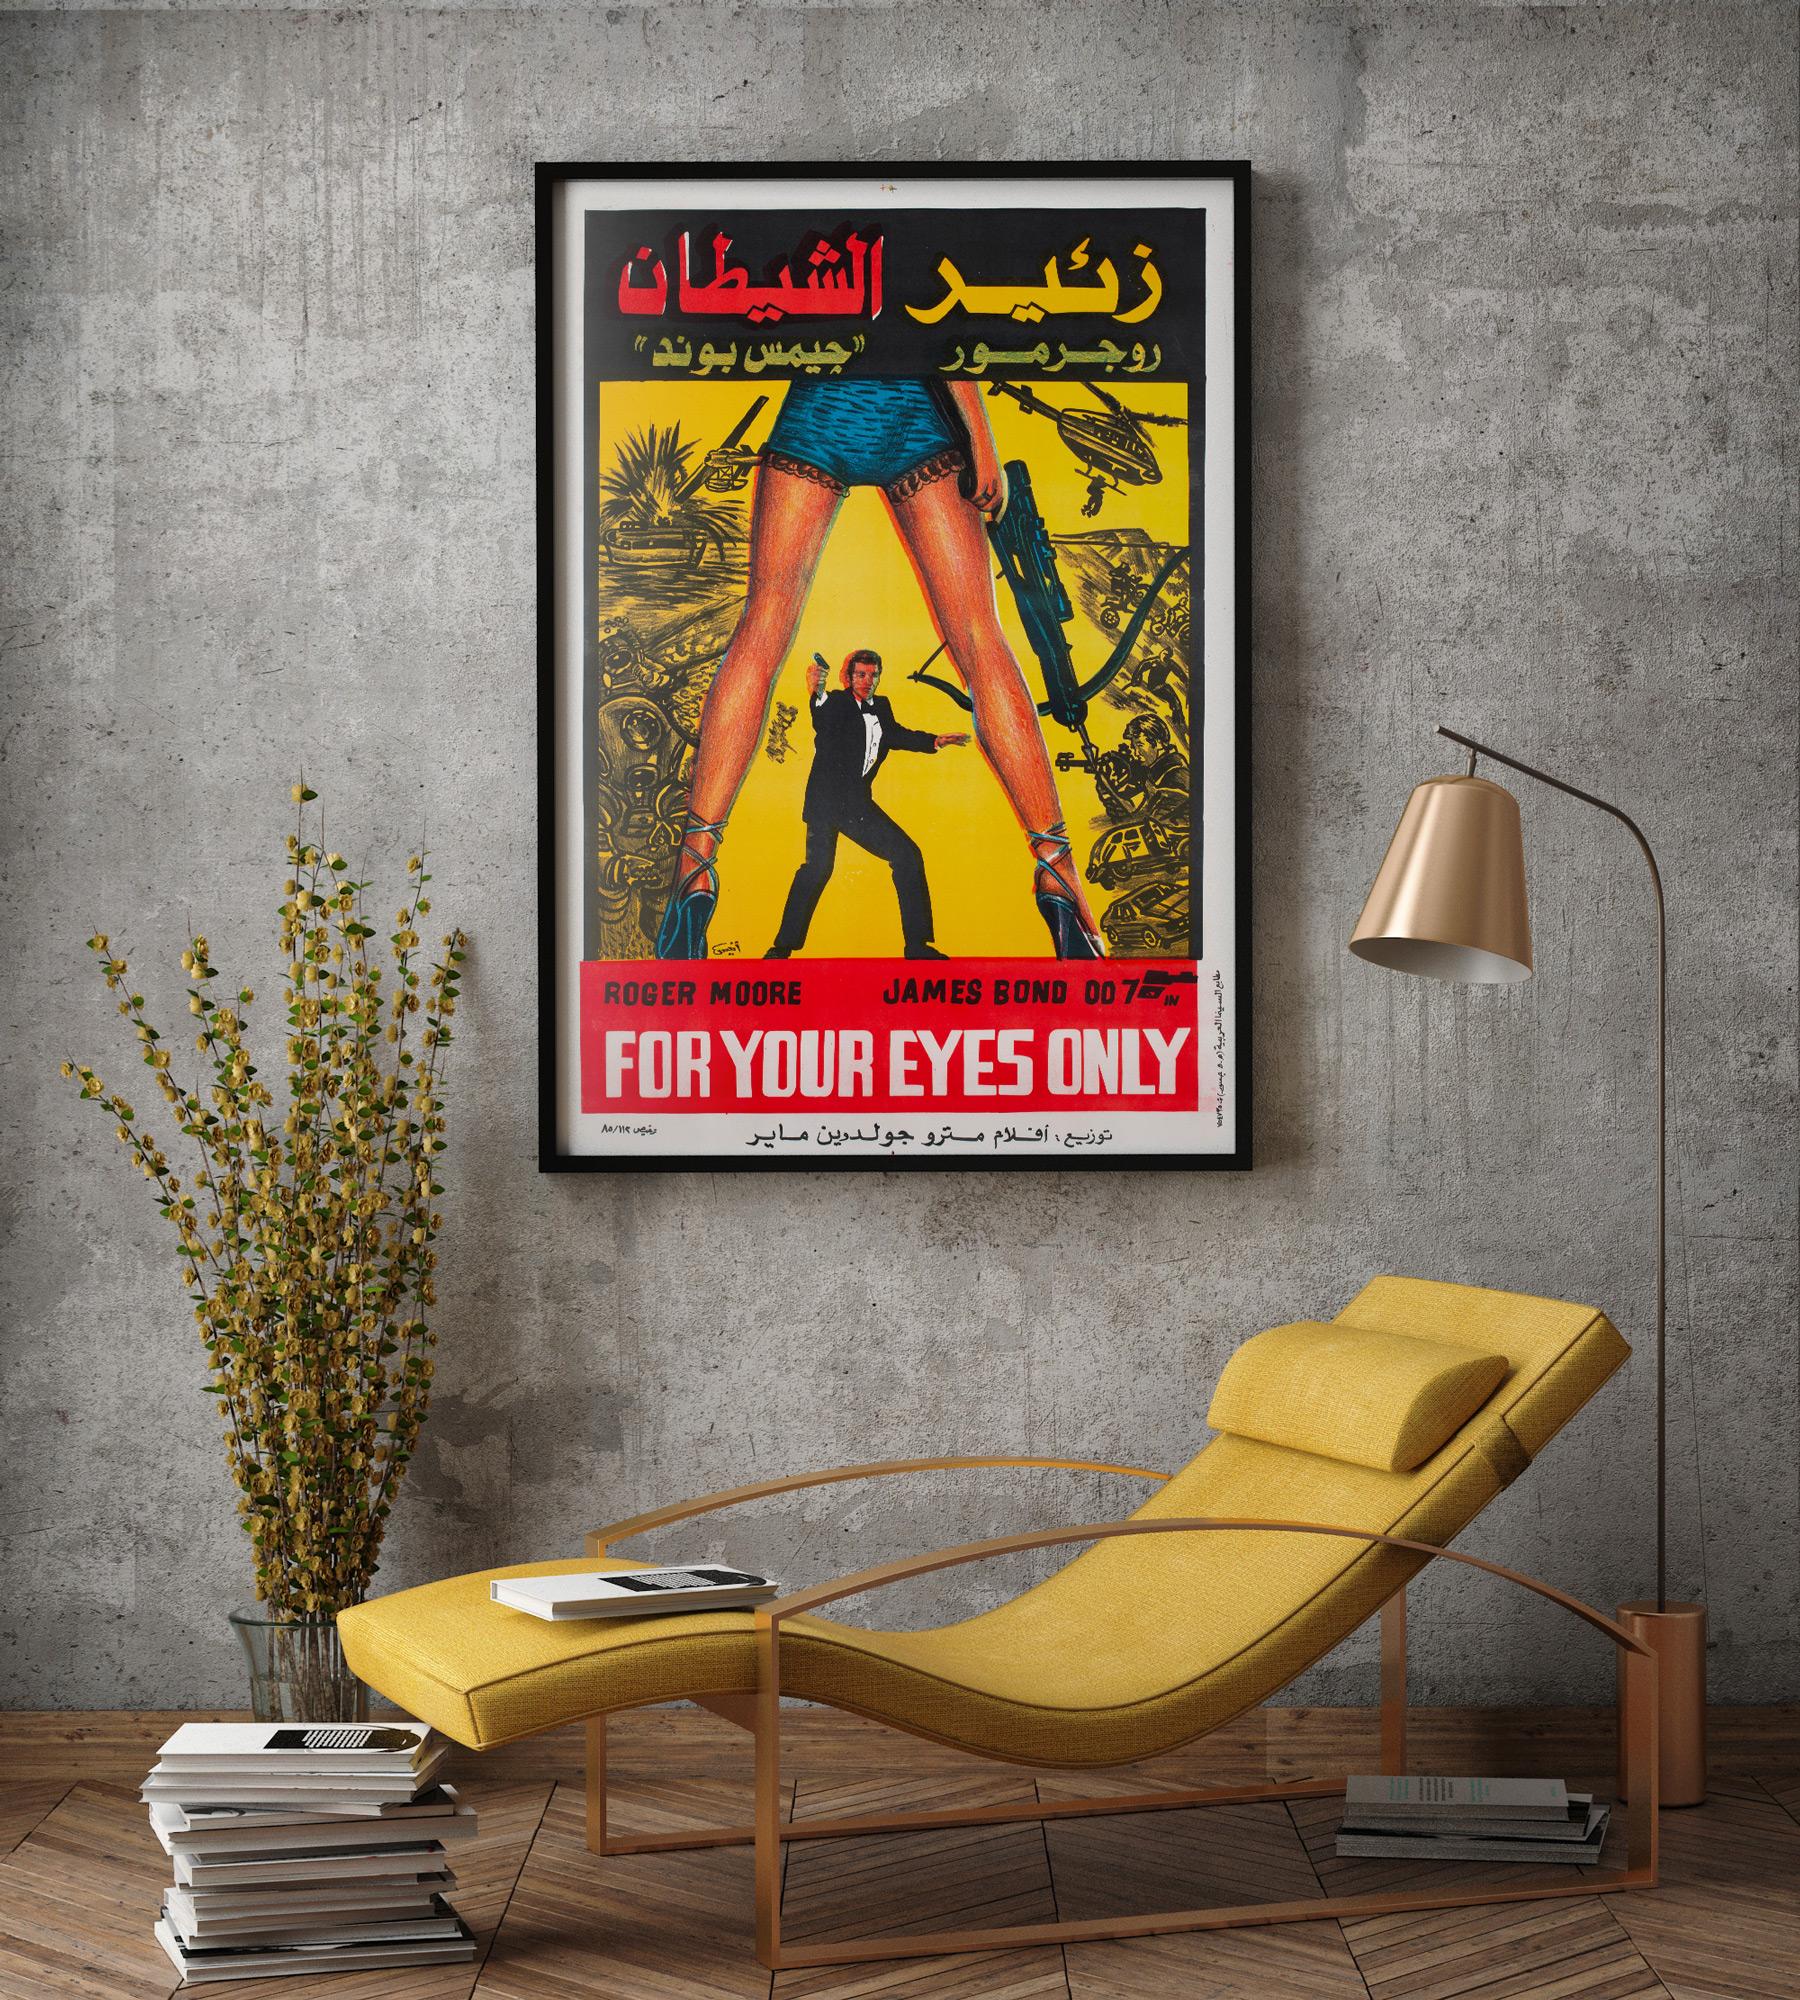 For Your Eyes Only 1981 Egyptian film movie poster - Linen backed

Another fantastic Egyptian film poster, this time for James Bond's For Your Eyes Only. Fabulous colors.

This original vintage movie poster was folded (as issued) but has been